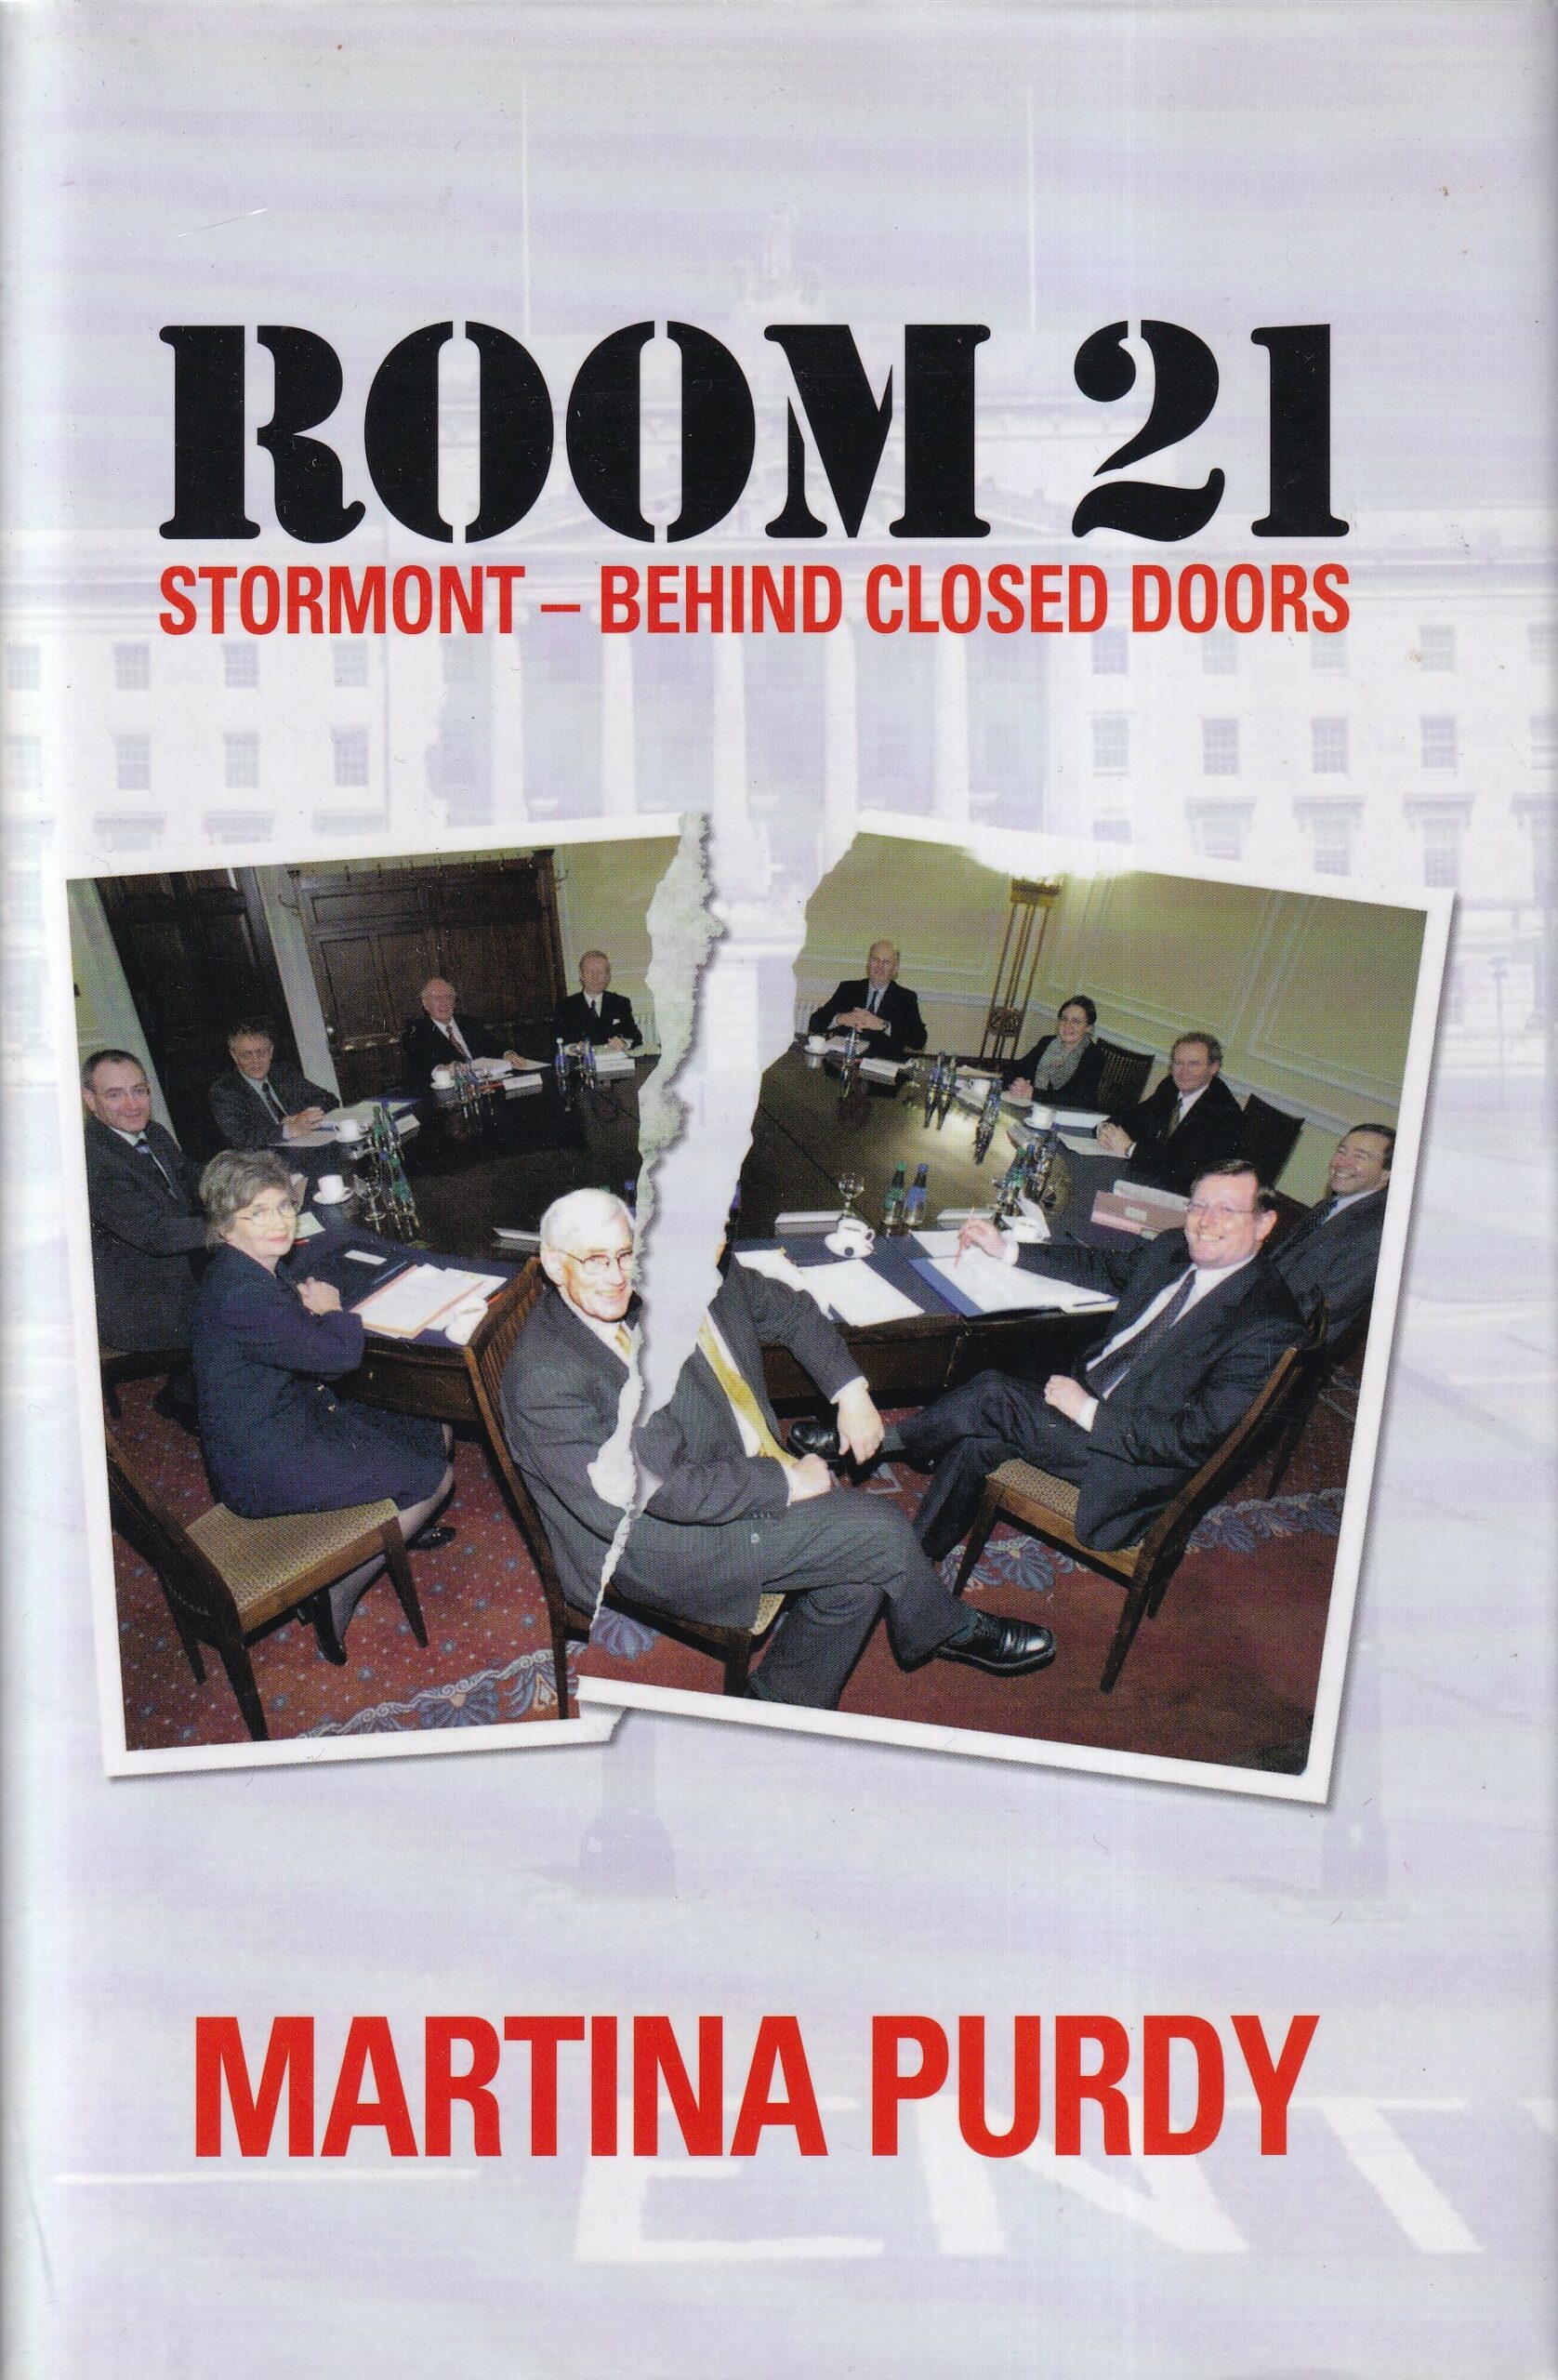 Room 21: Stormont- Behind Closed Doors by Martina Purdy